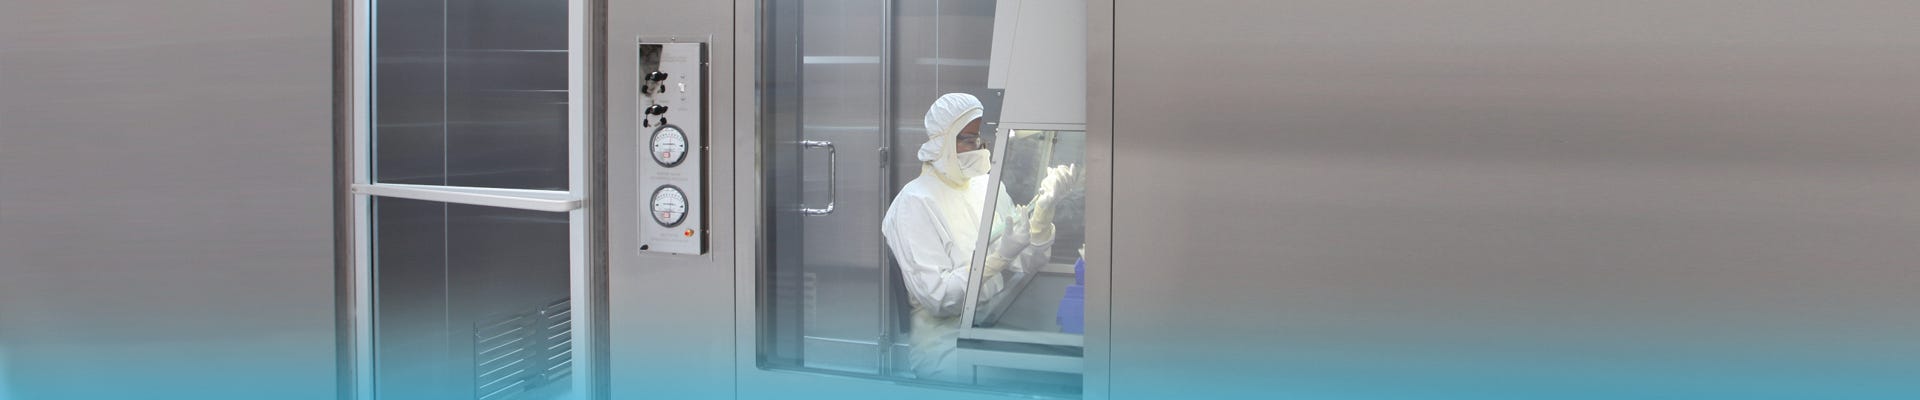 Modular cleanrooms for pharmaceutical compounding meet requirements of usp 797 sterile and usp 800 hazardous-drug compounding